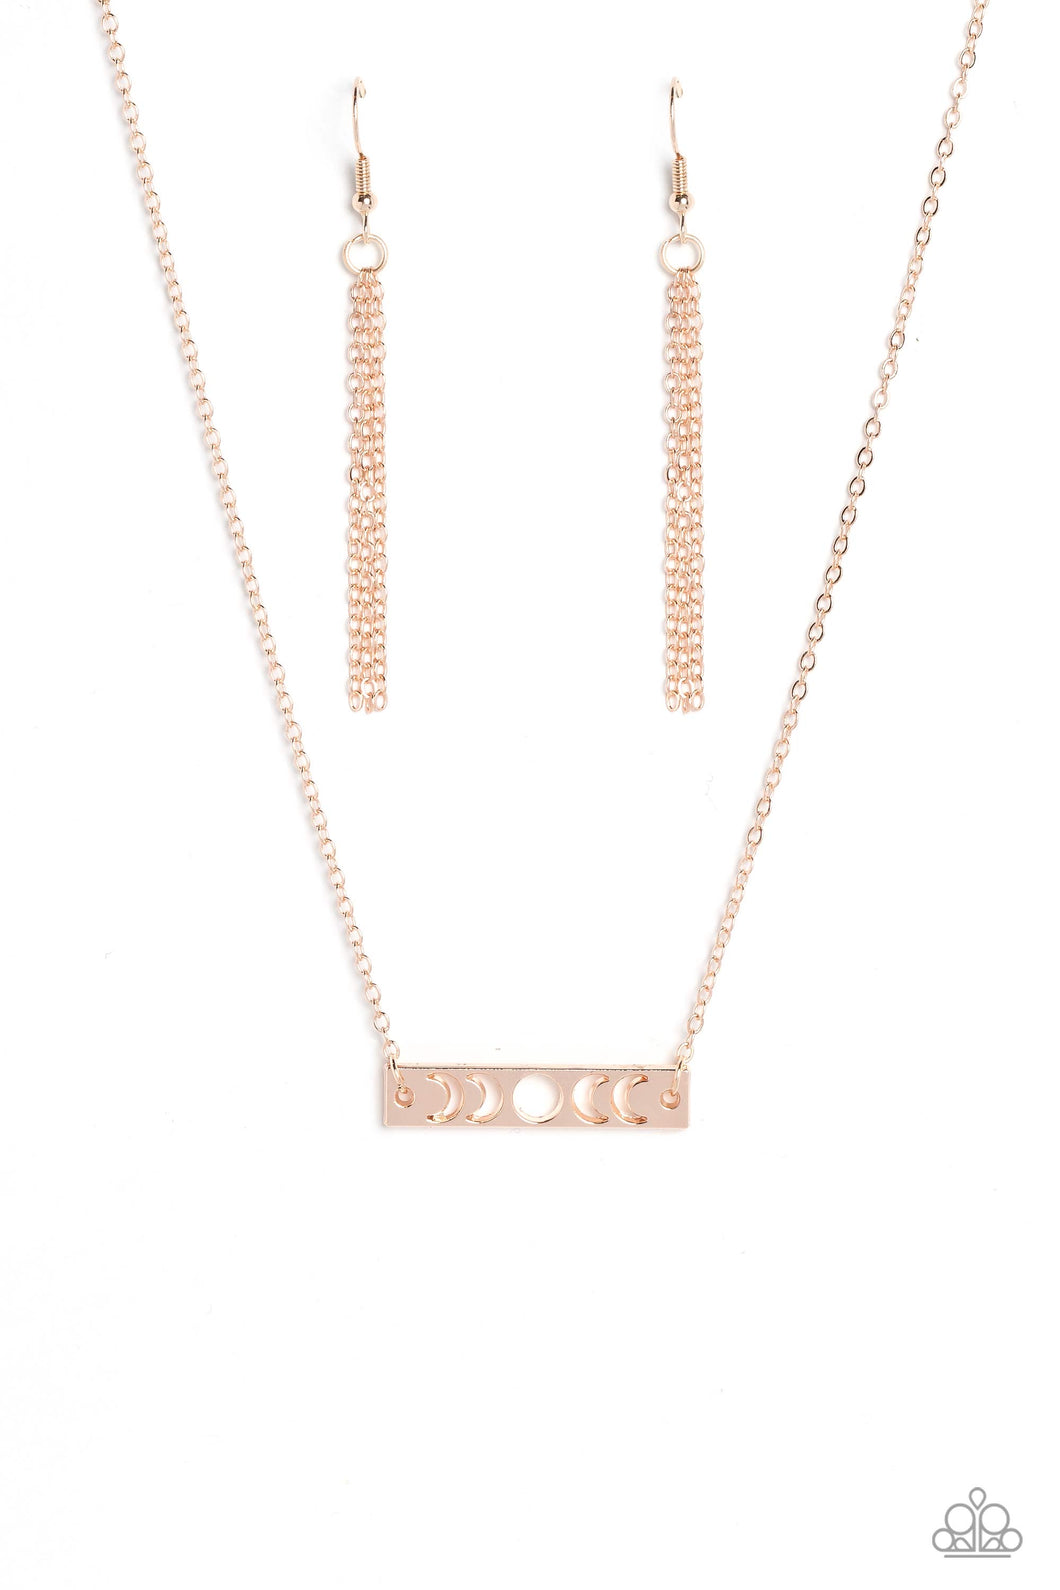 Paparazzi Necklace LUNAR or Later - Rose Gold